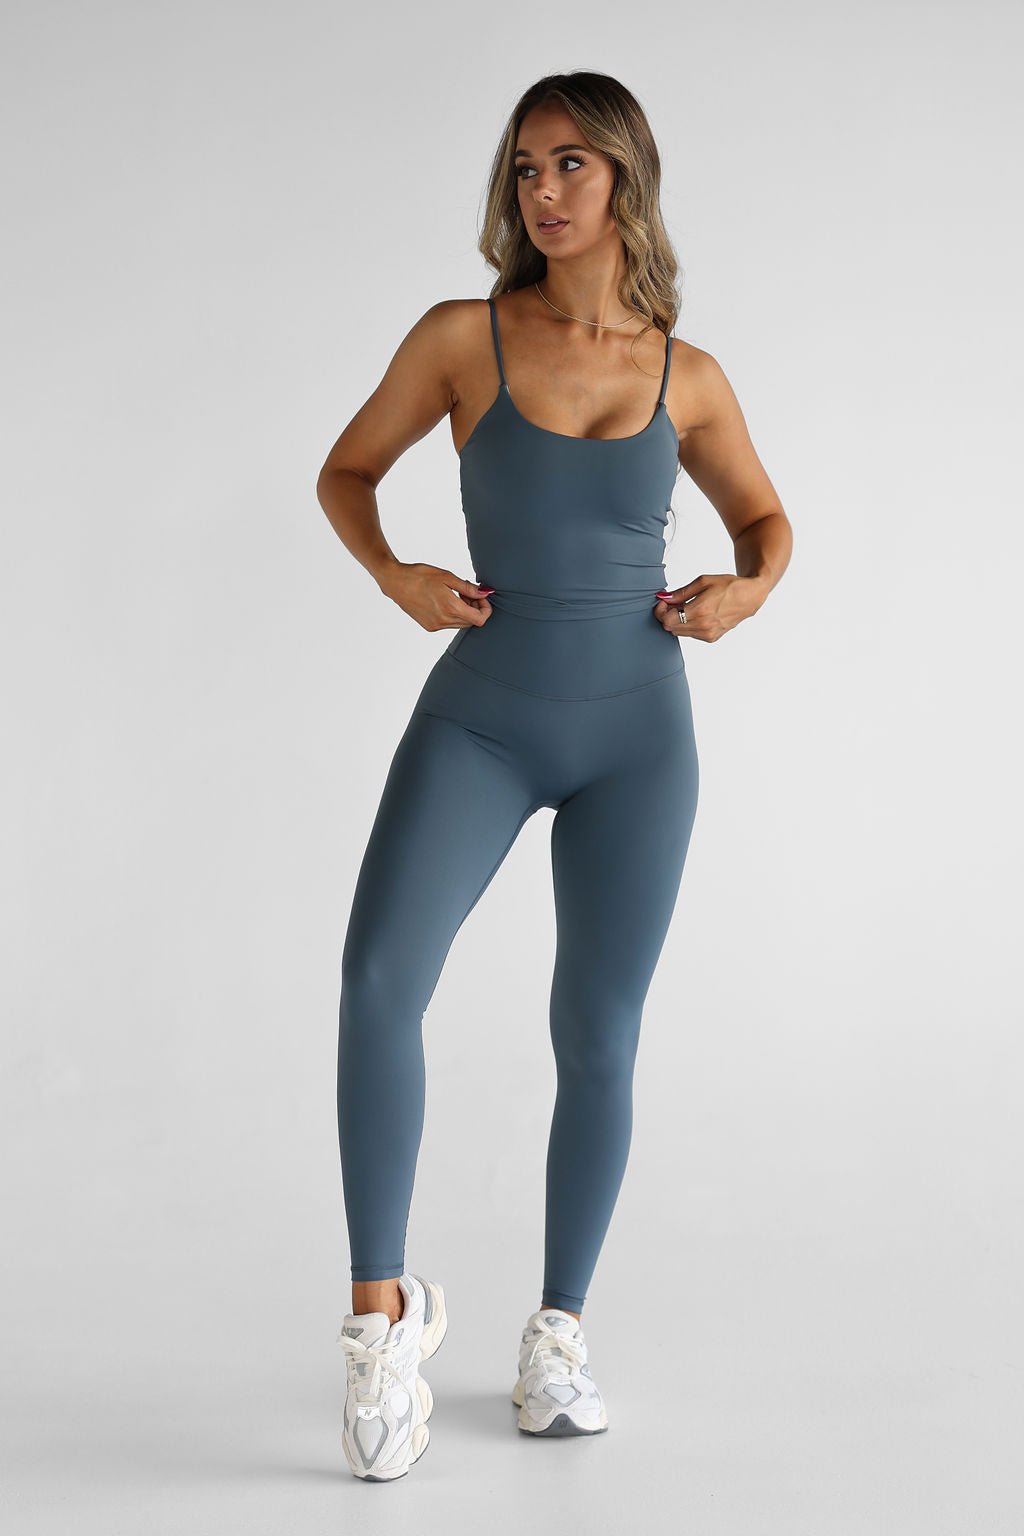 Body Sculpting Top (Sustainable) – Cloo Active